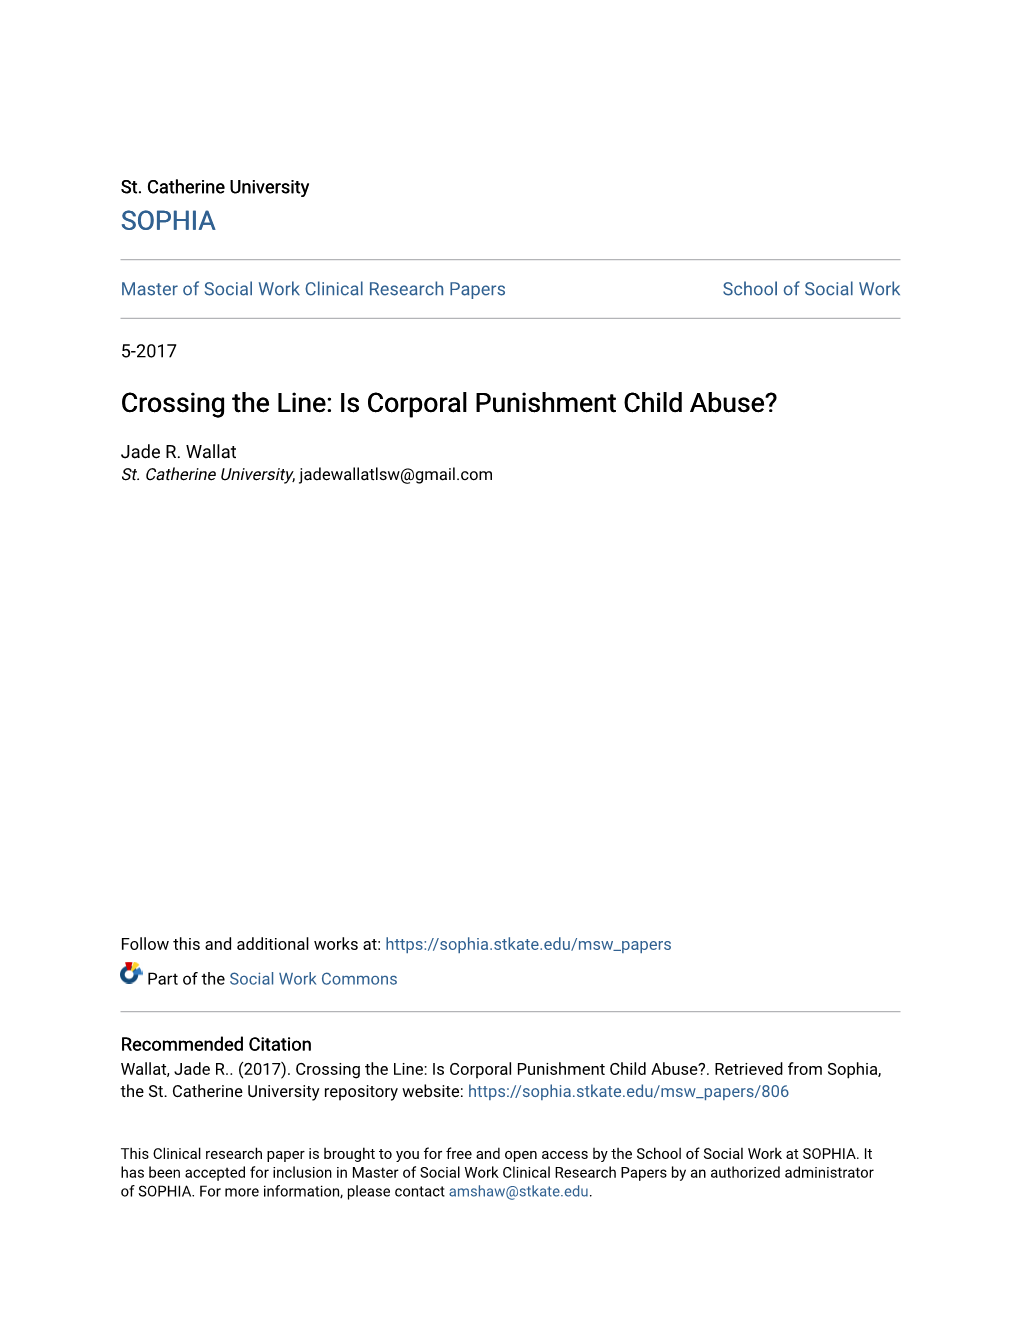 Is Corporal Punishment Child Abuse?